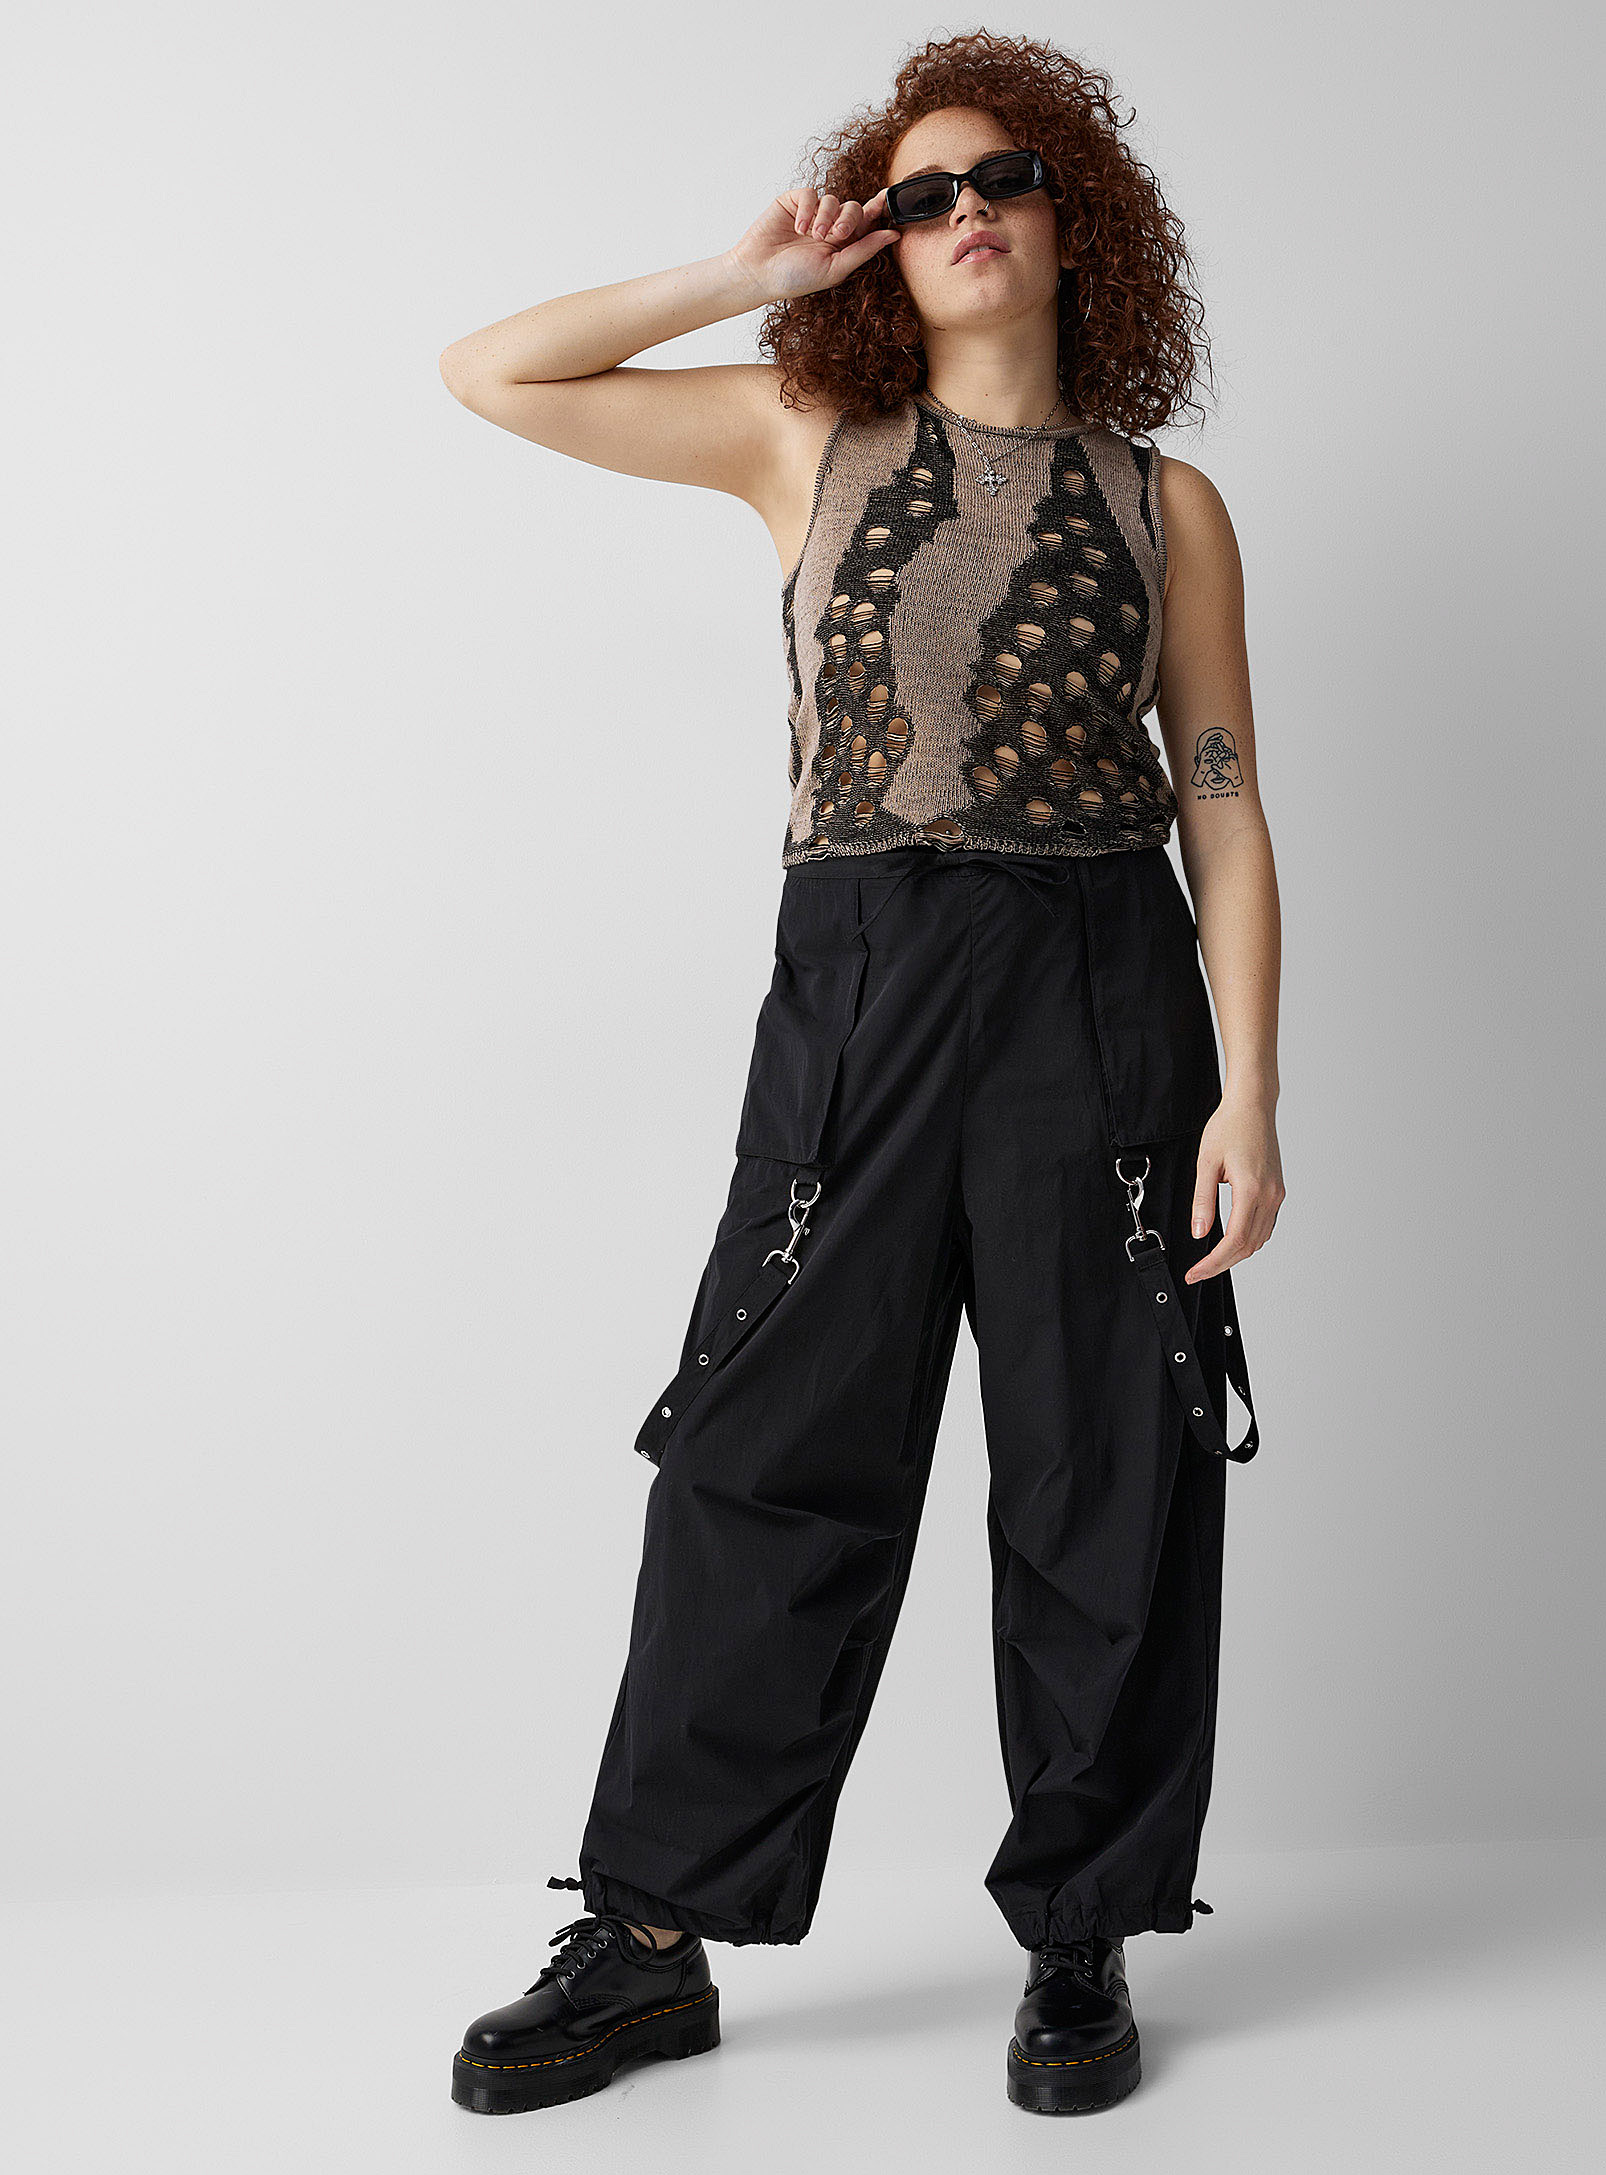 Square One Swoop Pants 